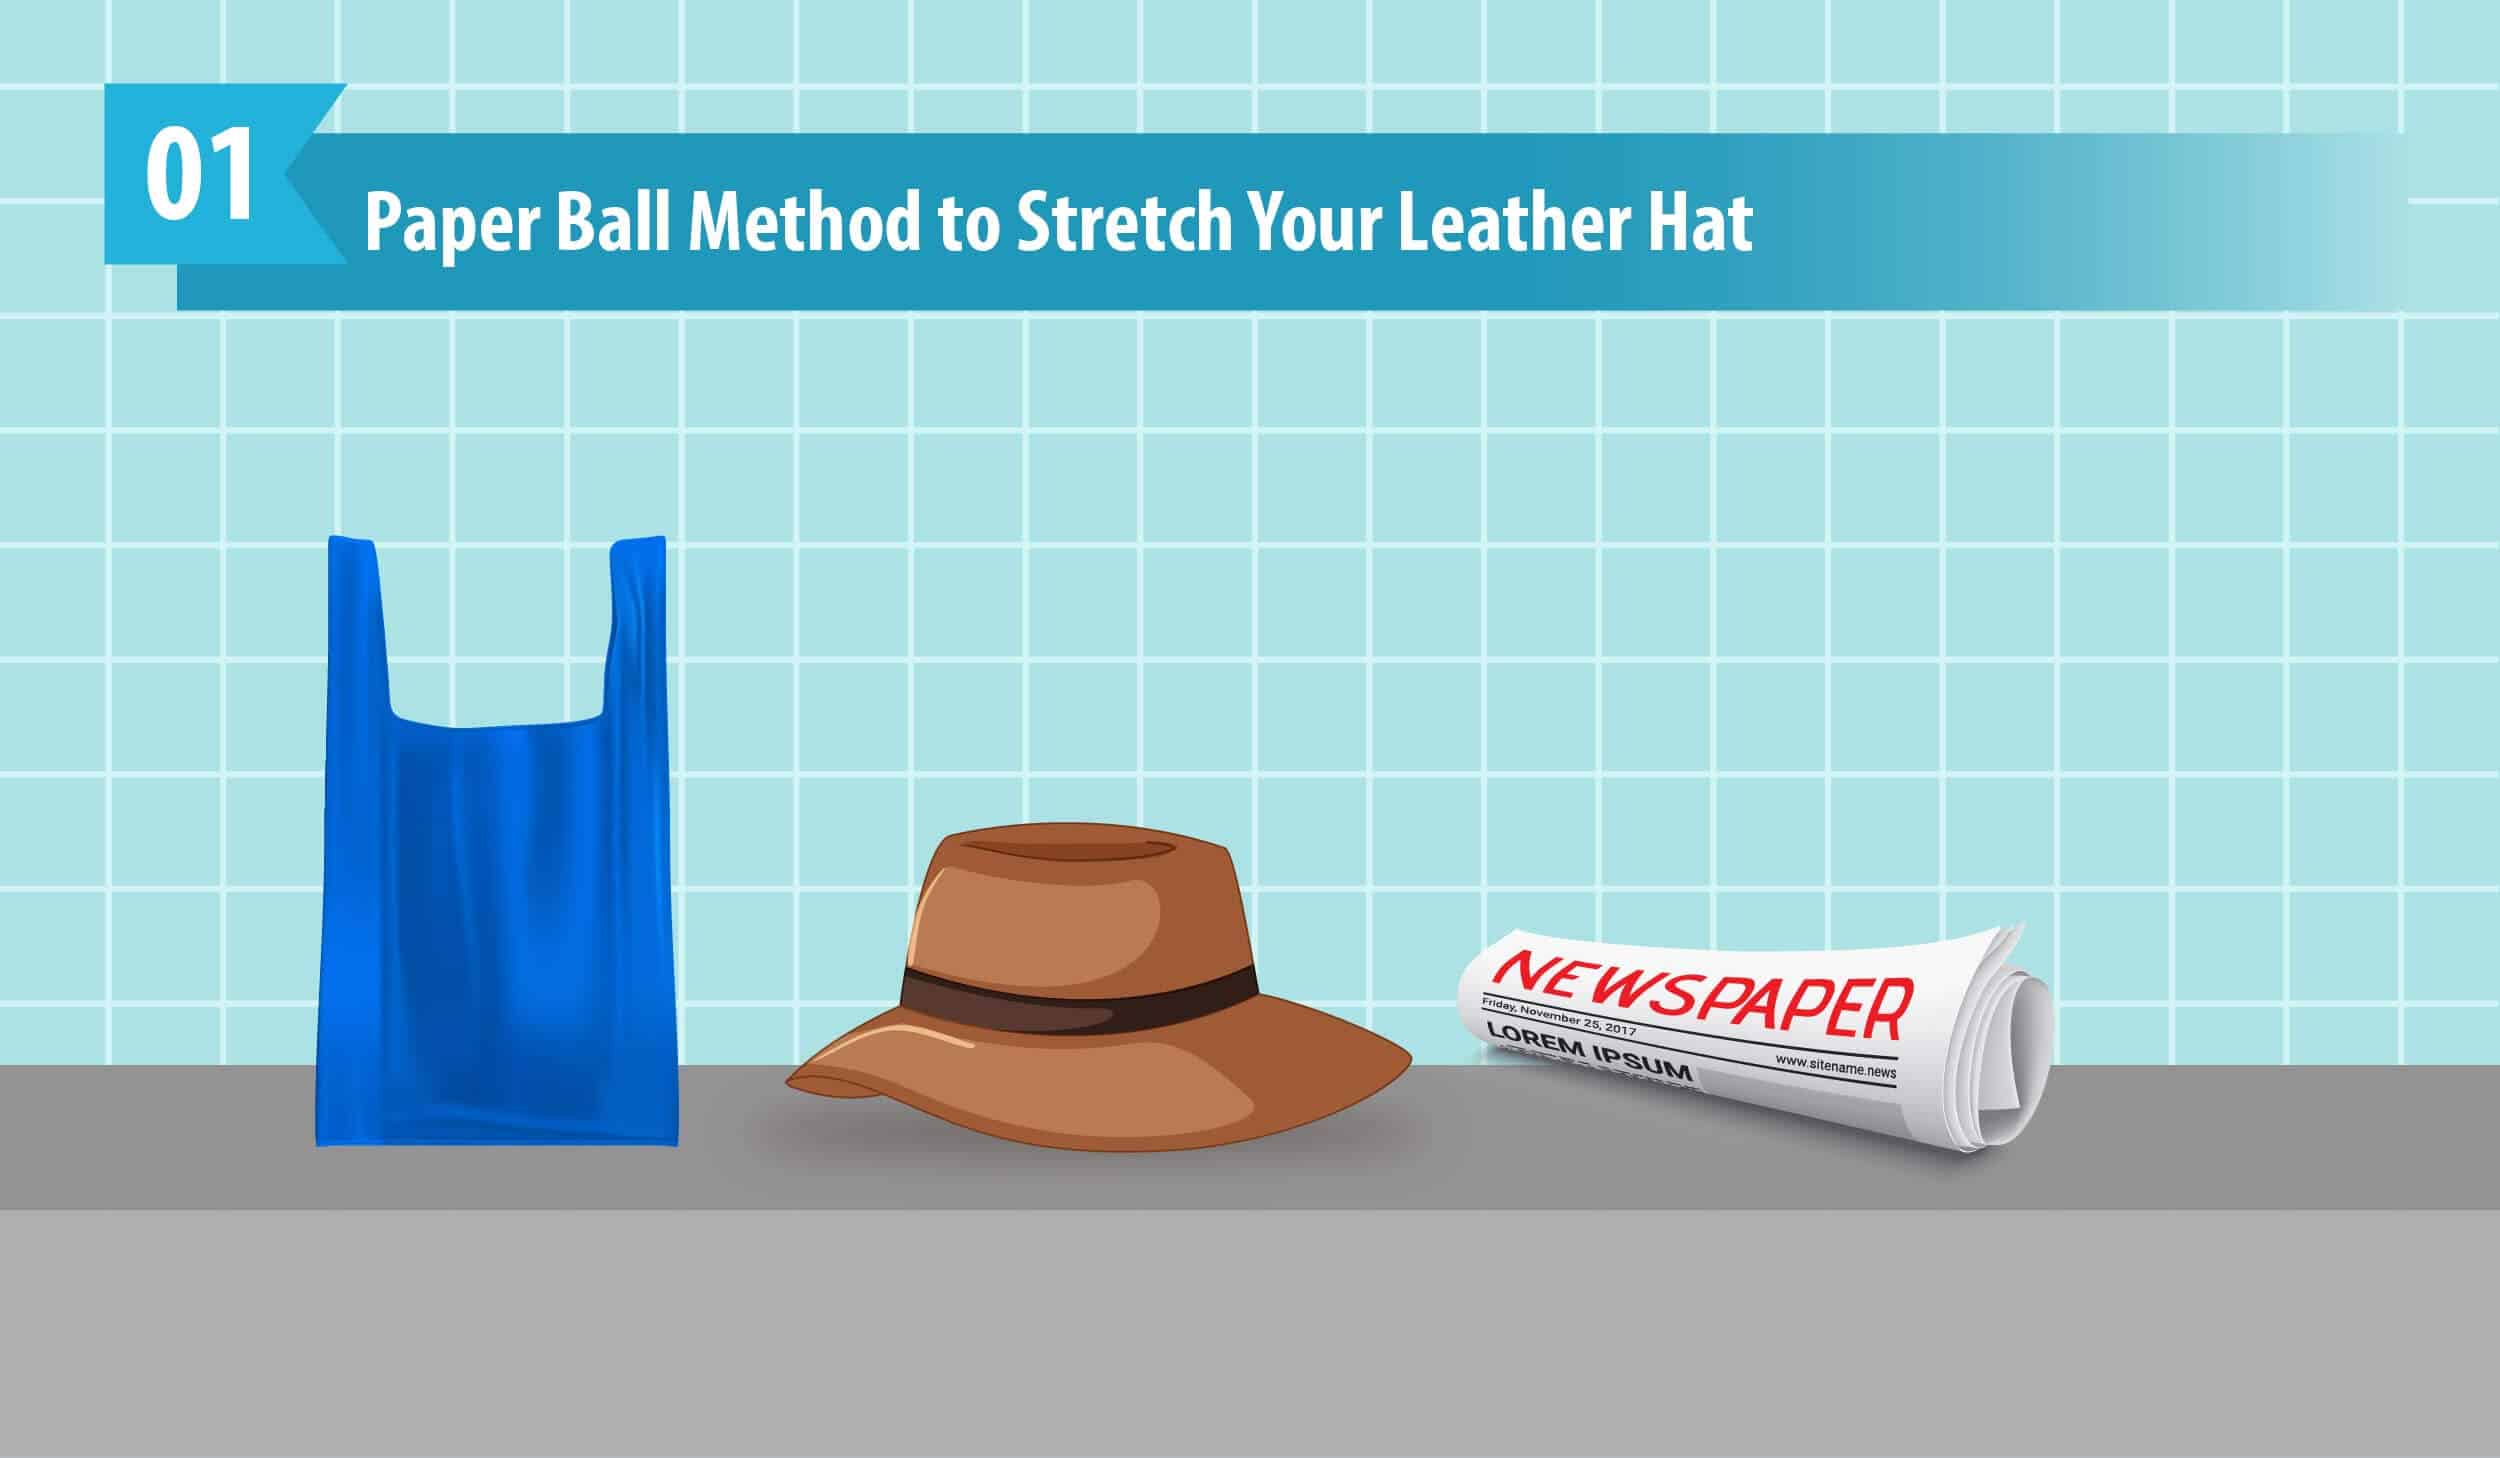 Paper Ball Method to Stretch Your Leather Hat